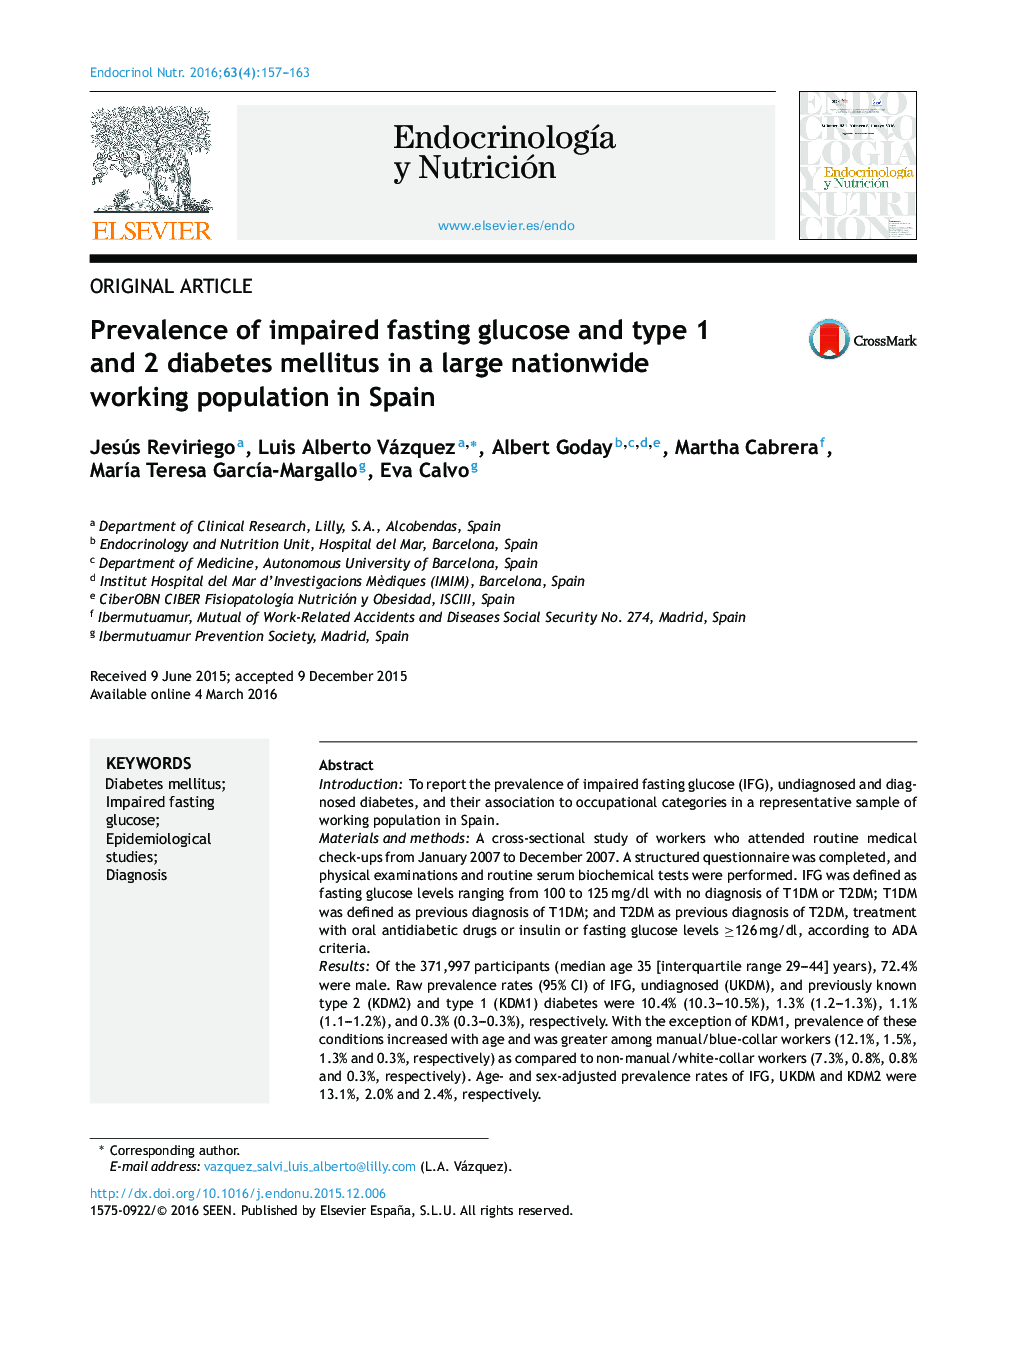 Prevalence of impaired fasting glucose and type 1 and 2 diabetes mellitus in a large nationwide working population in Spain